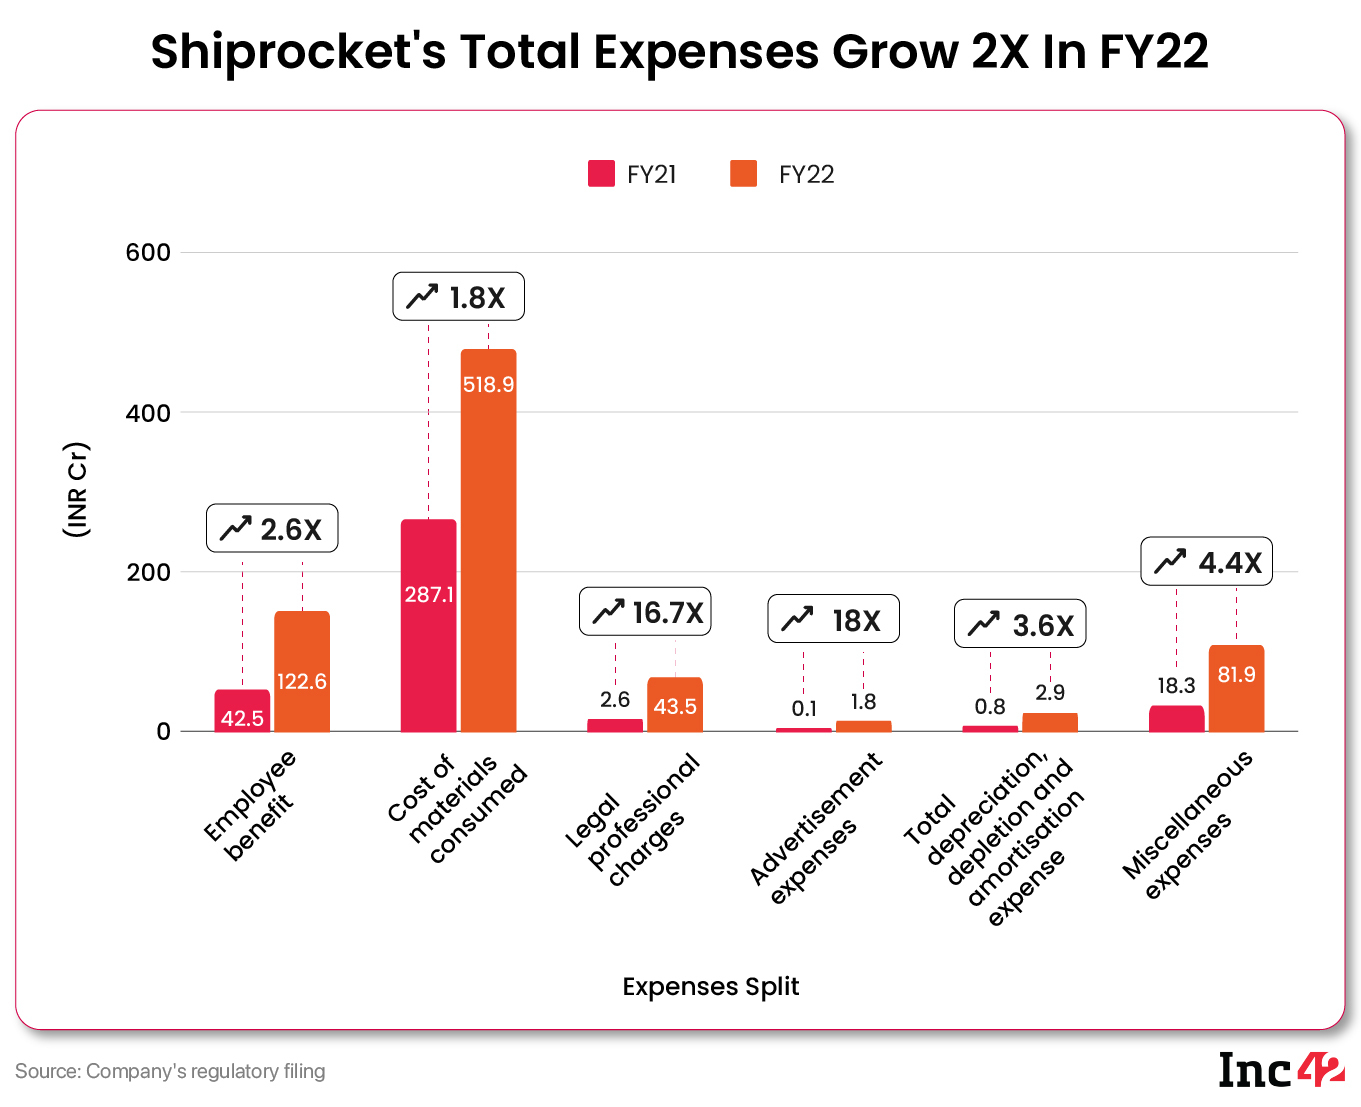 Shiprocket Total Expenses Grow 2X in FY22